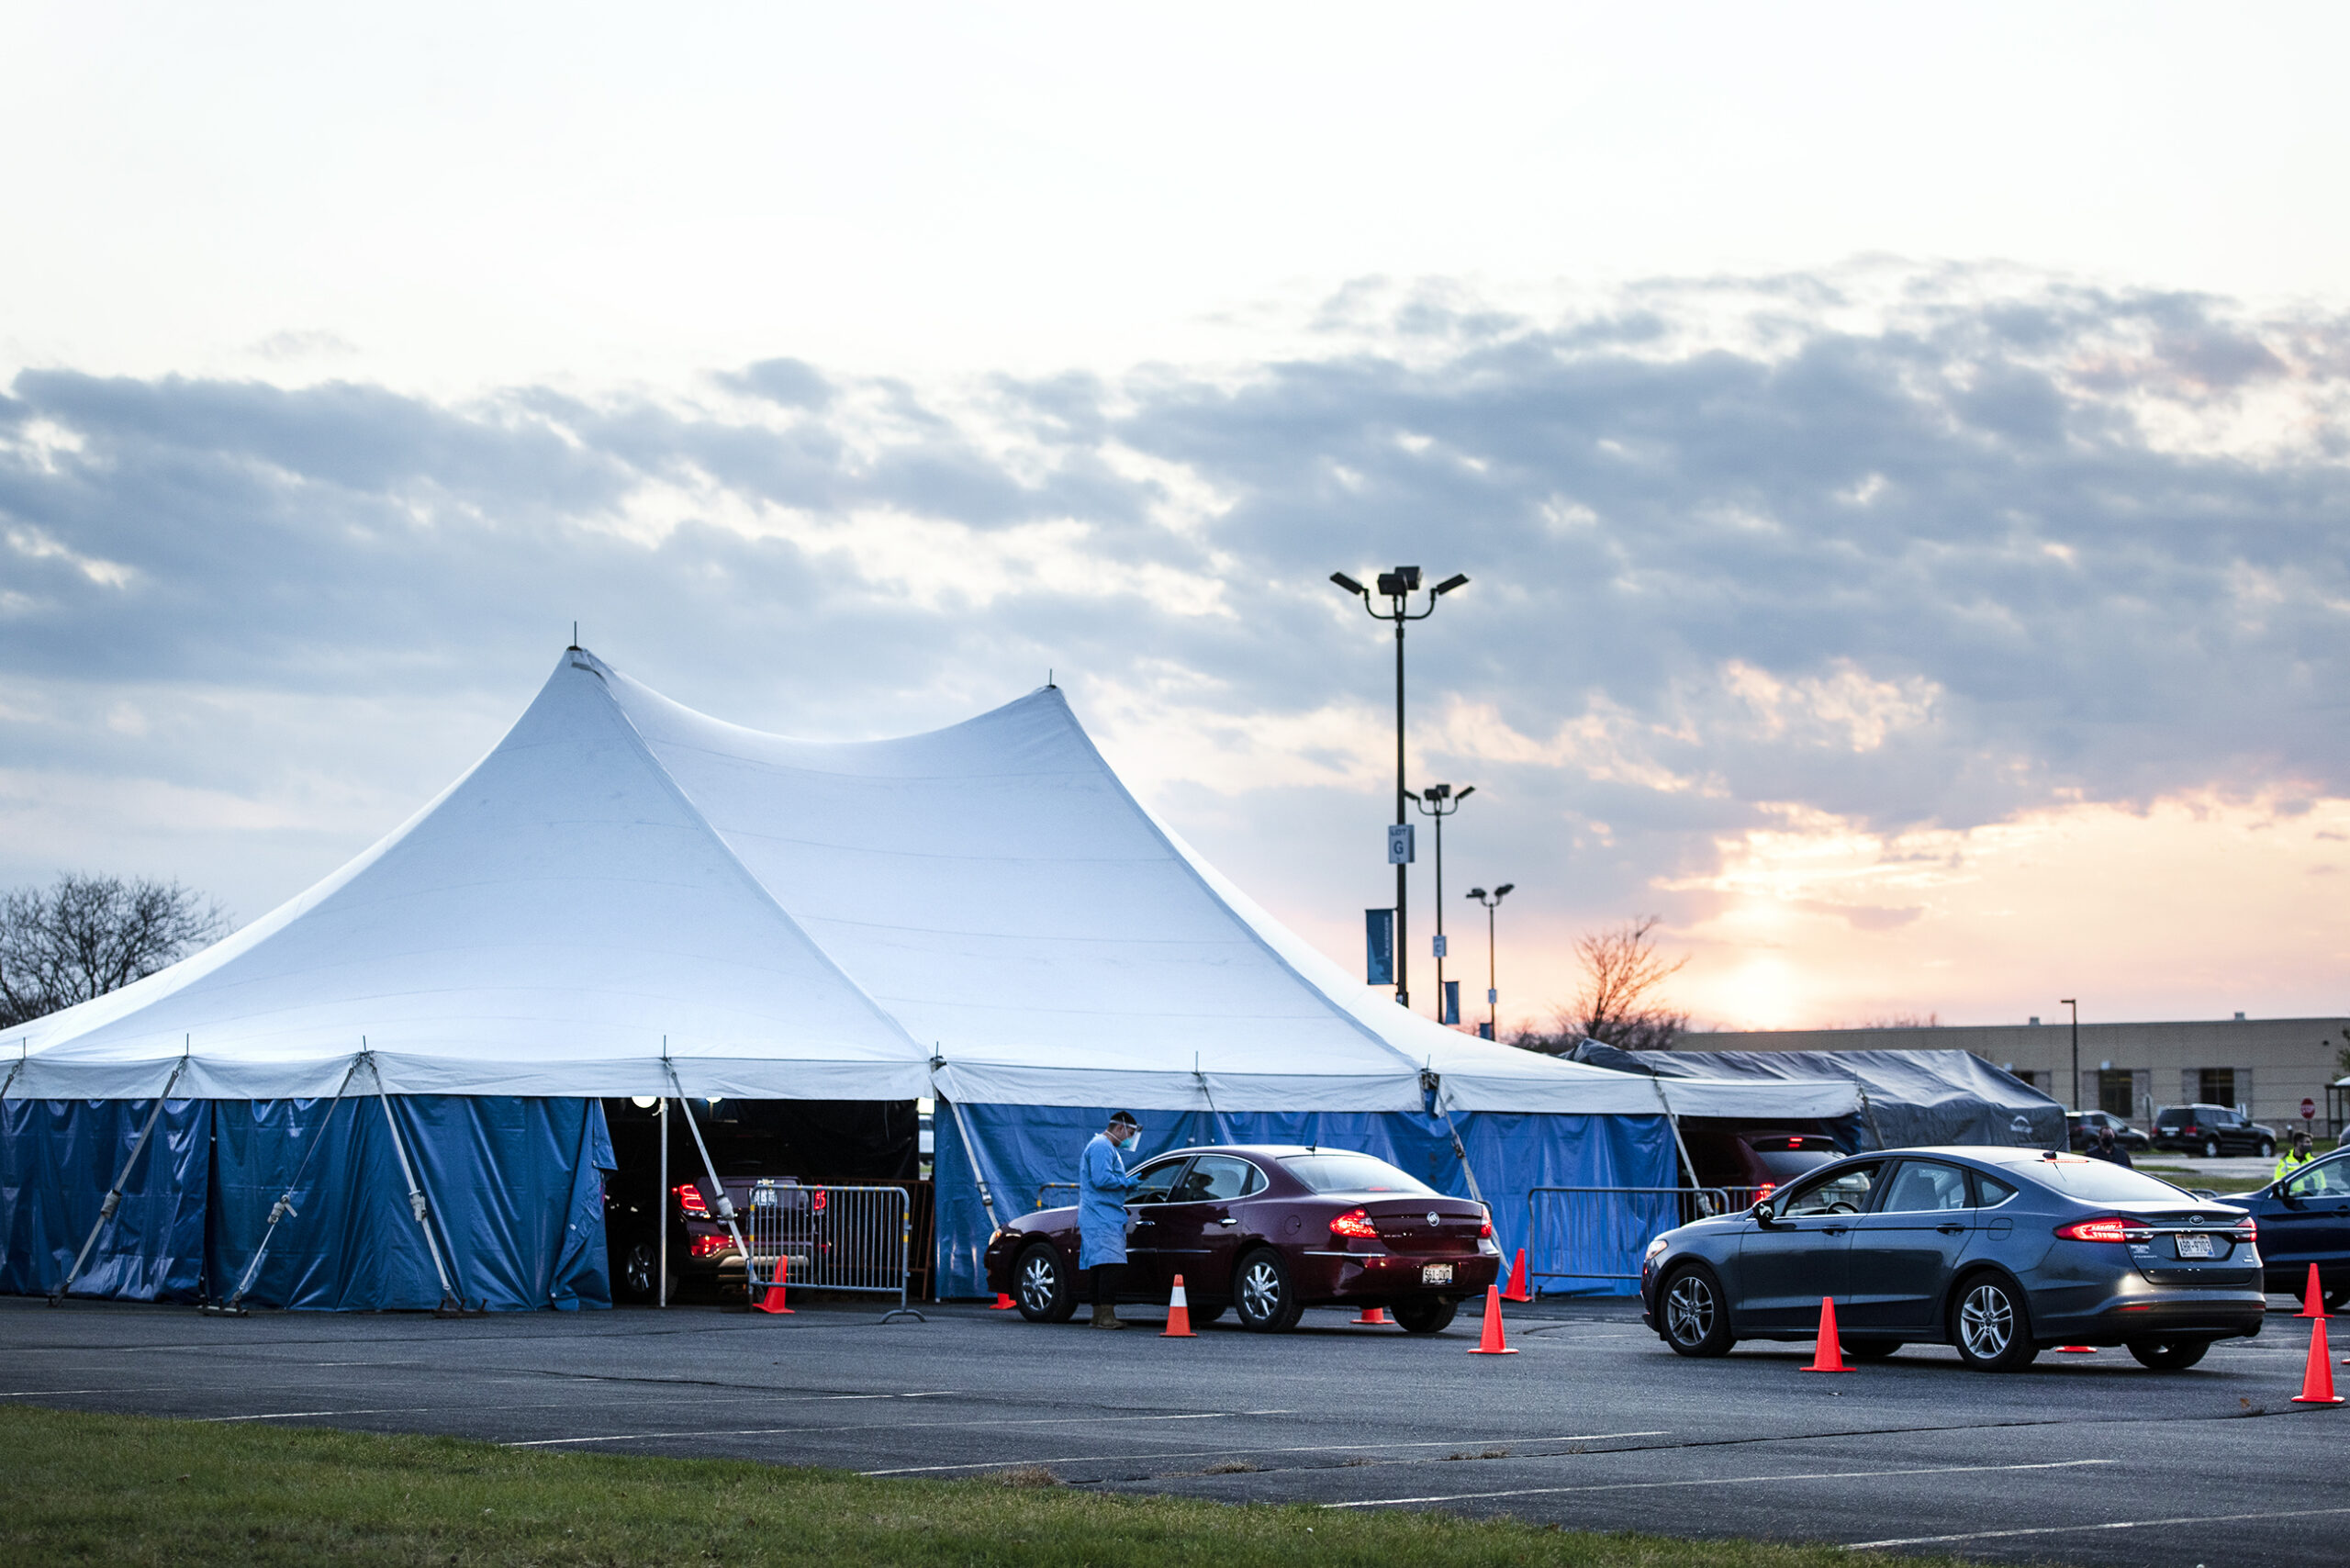 A tent is set up for vehicles to drive through and receive COVID-19 testing